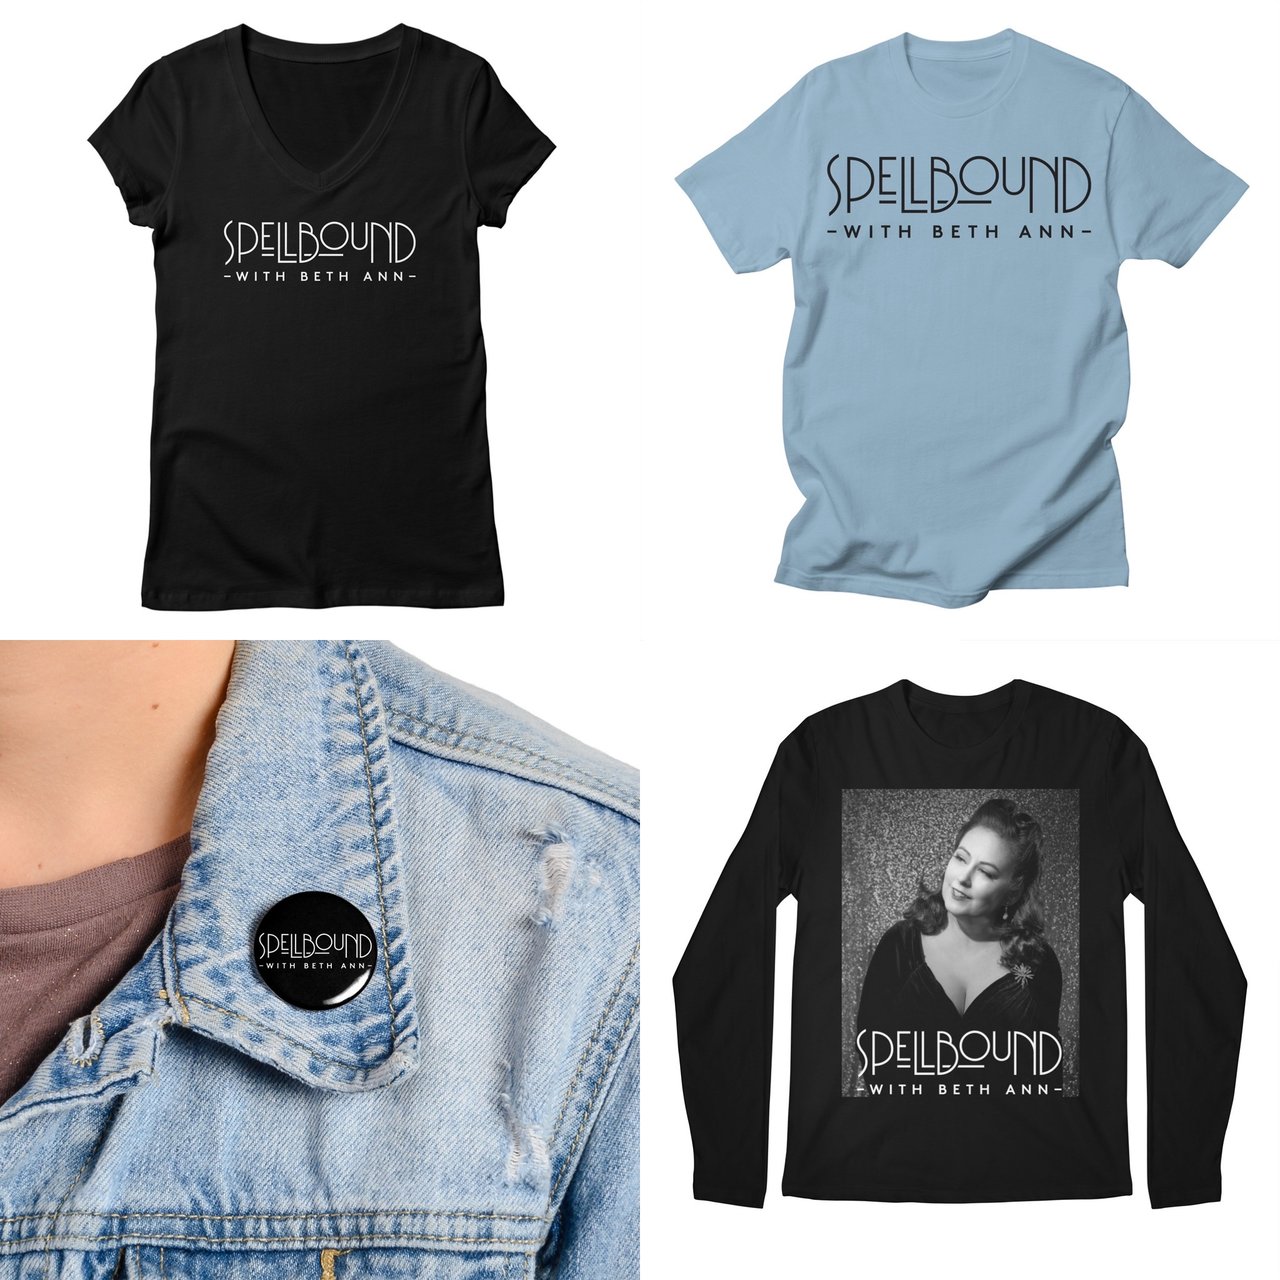 A square containing images of four Threadless items. Each has a Spellbound With Beth Ann logo. A black, vee neck tee with short sleeves, a baby blue, short sleeved tee, a black long sleeve tee, and a button worn on a denim jacket.